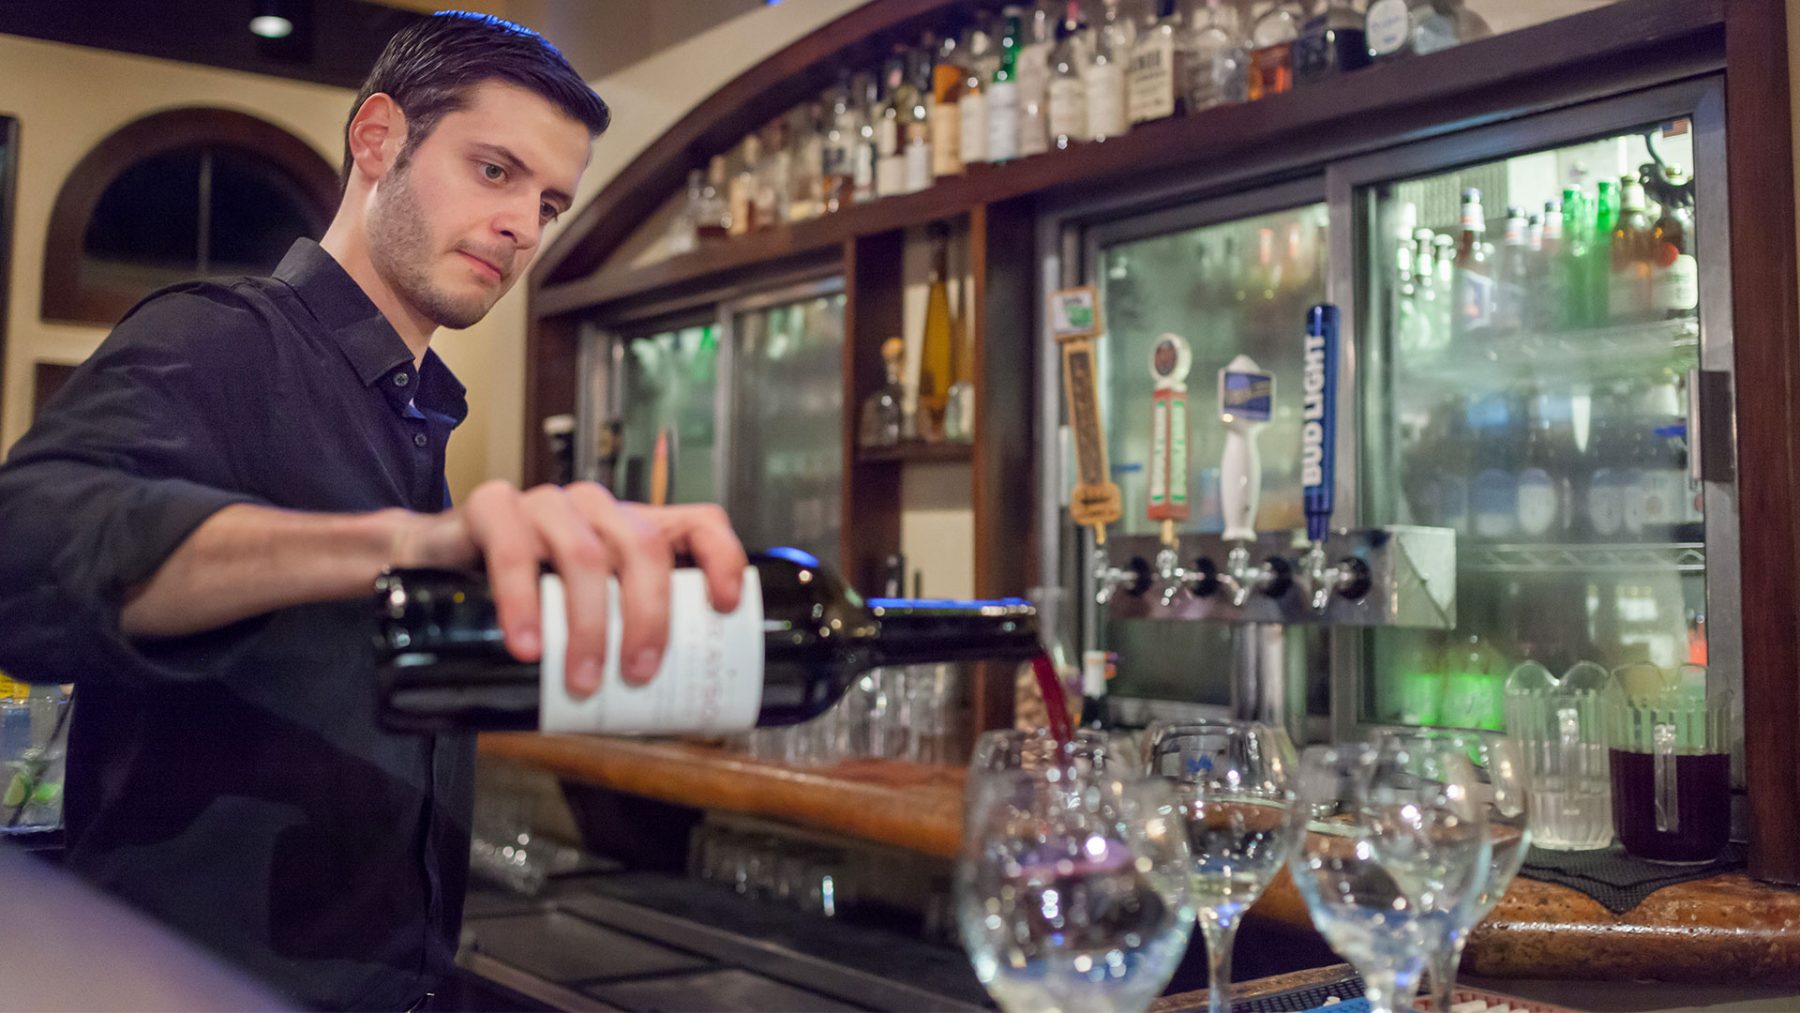 Bartender pouring wine at the bar